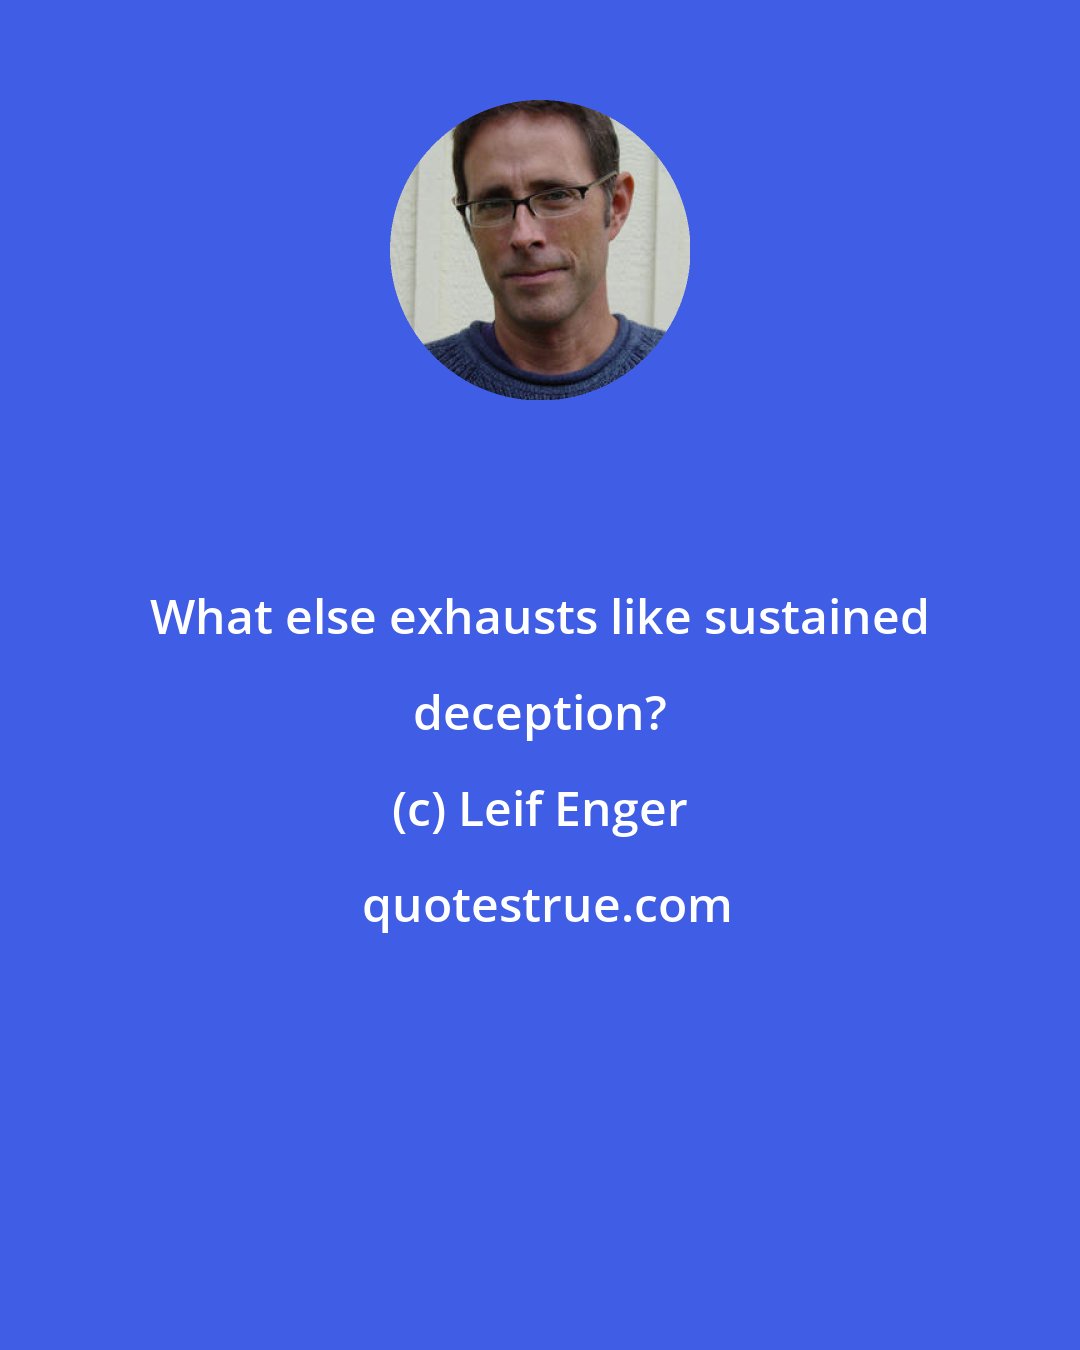 Leif Enger: What else exhausts like sustained deception?